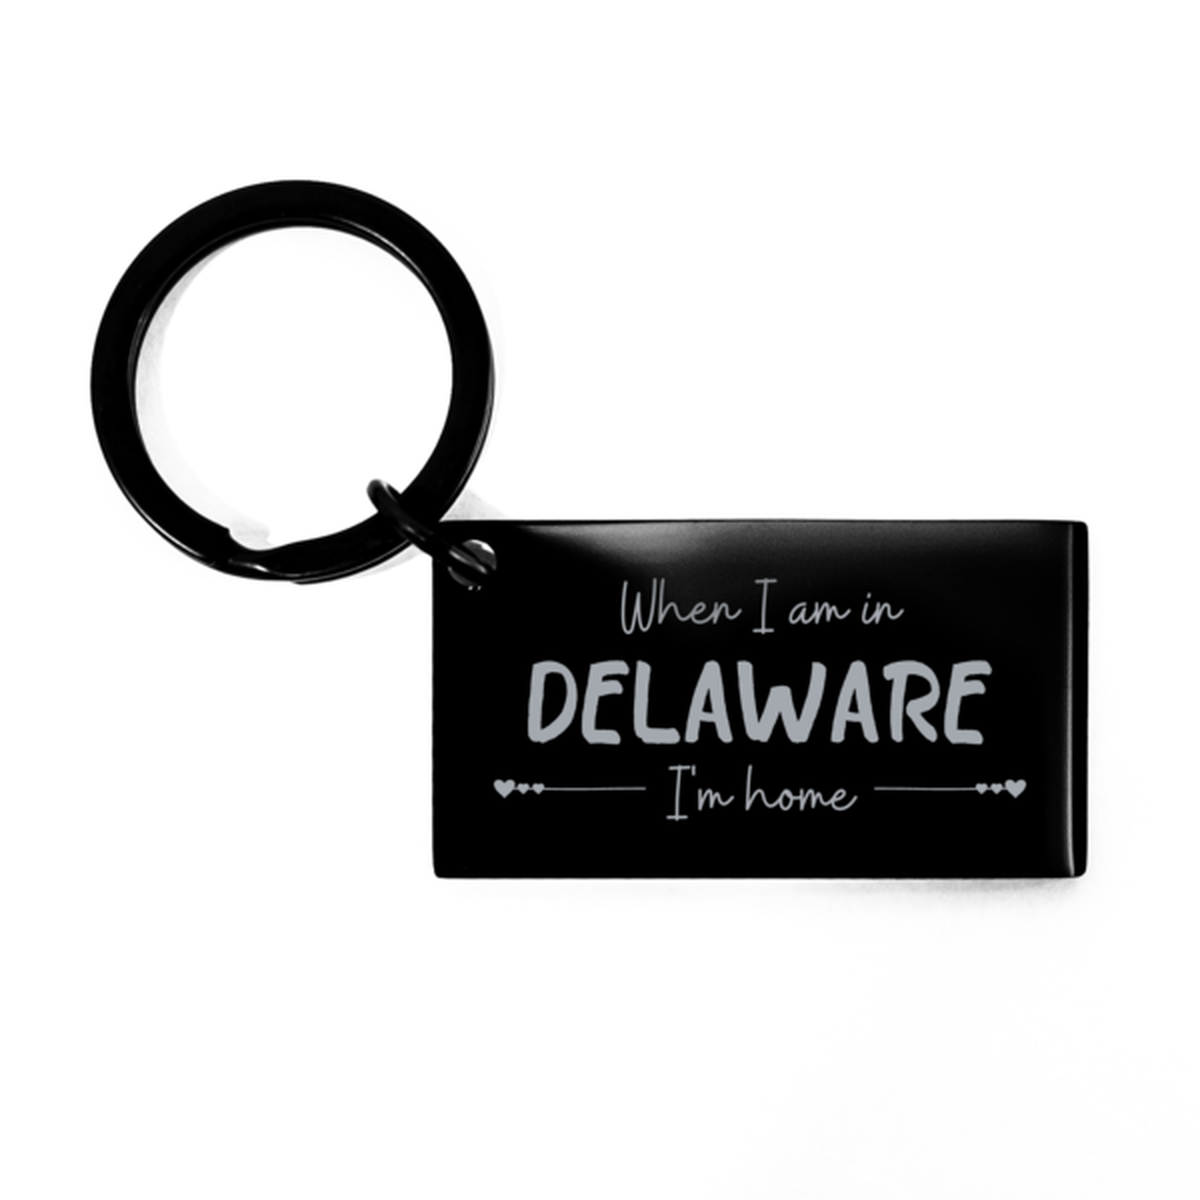 When I am in Delaware I'm home Keychain, Cheap Gifts For Delaware, State Delaware Birthday Gifts for Friends Coworker